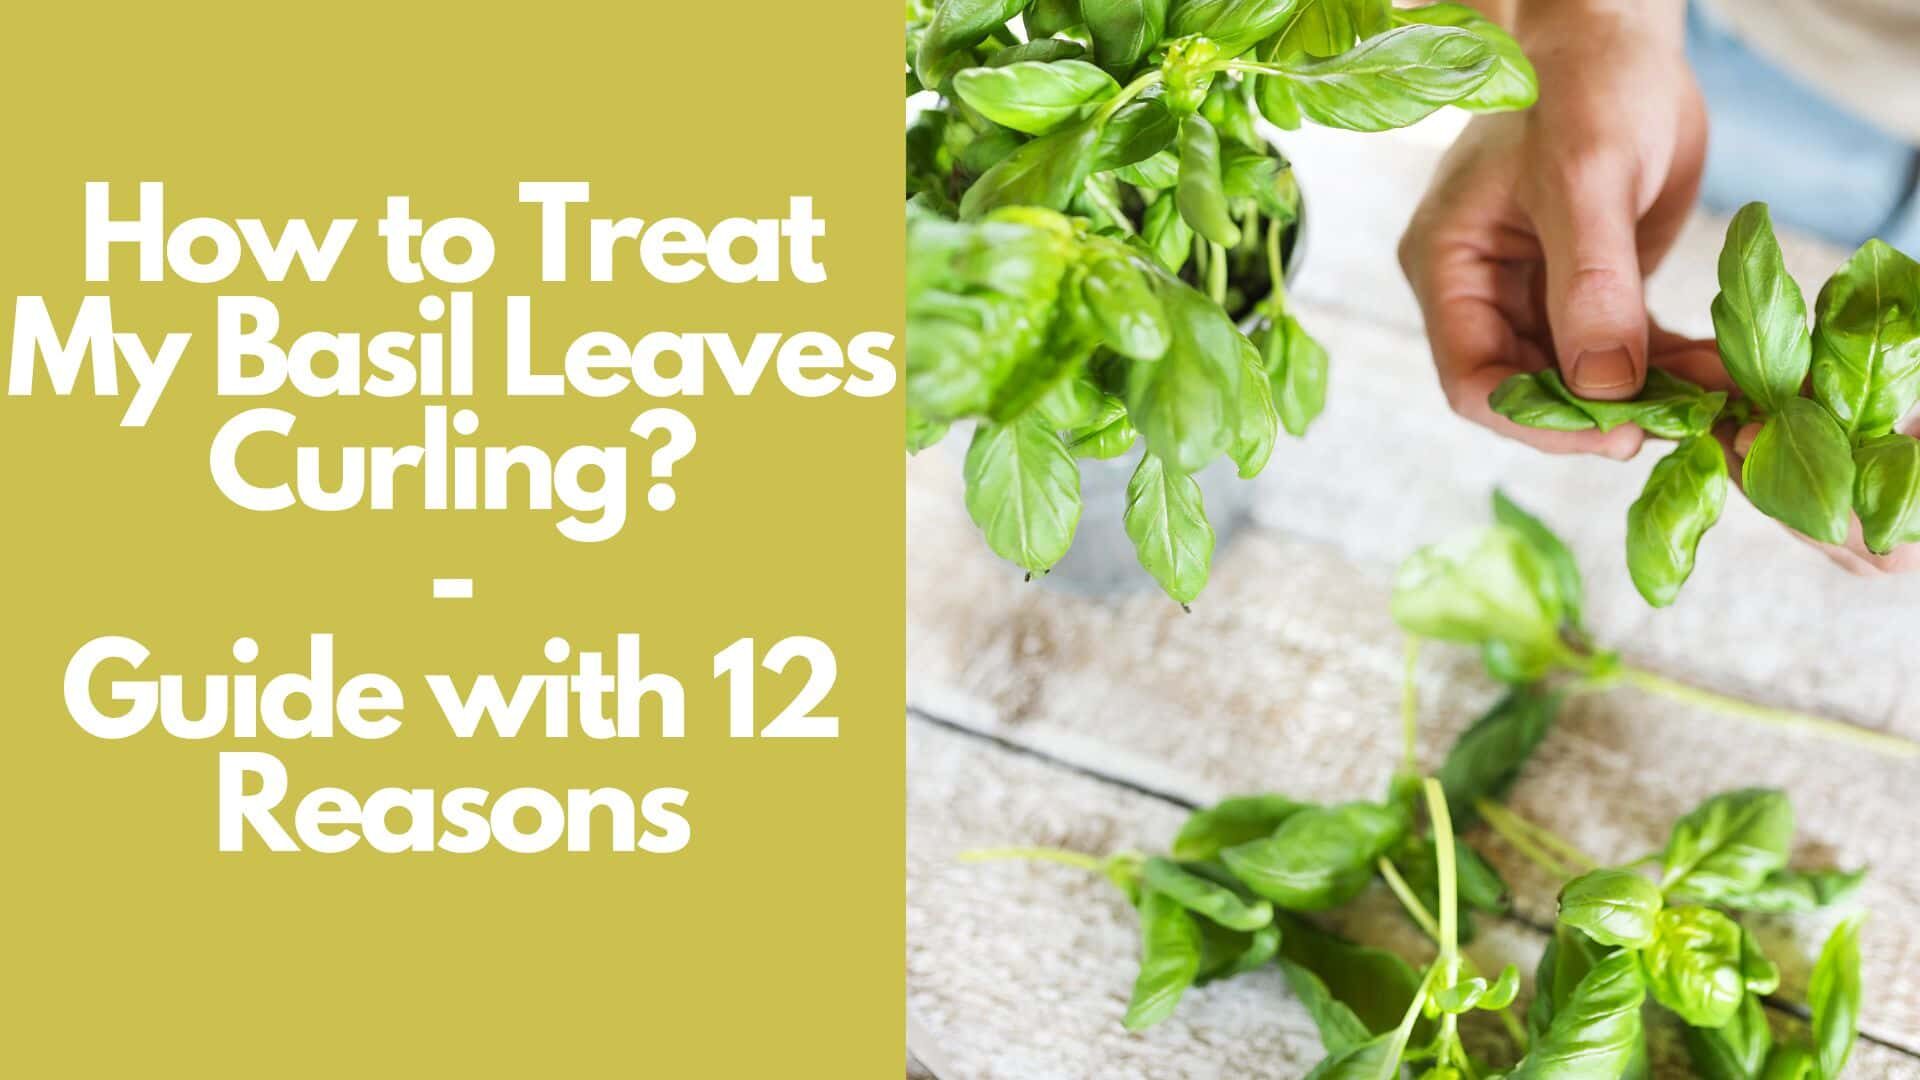 How to Treat My Basil Leaves Curling?| Guide with 12 Reasons